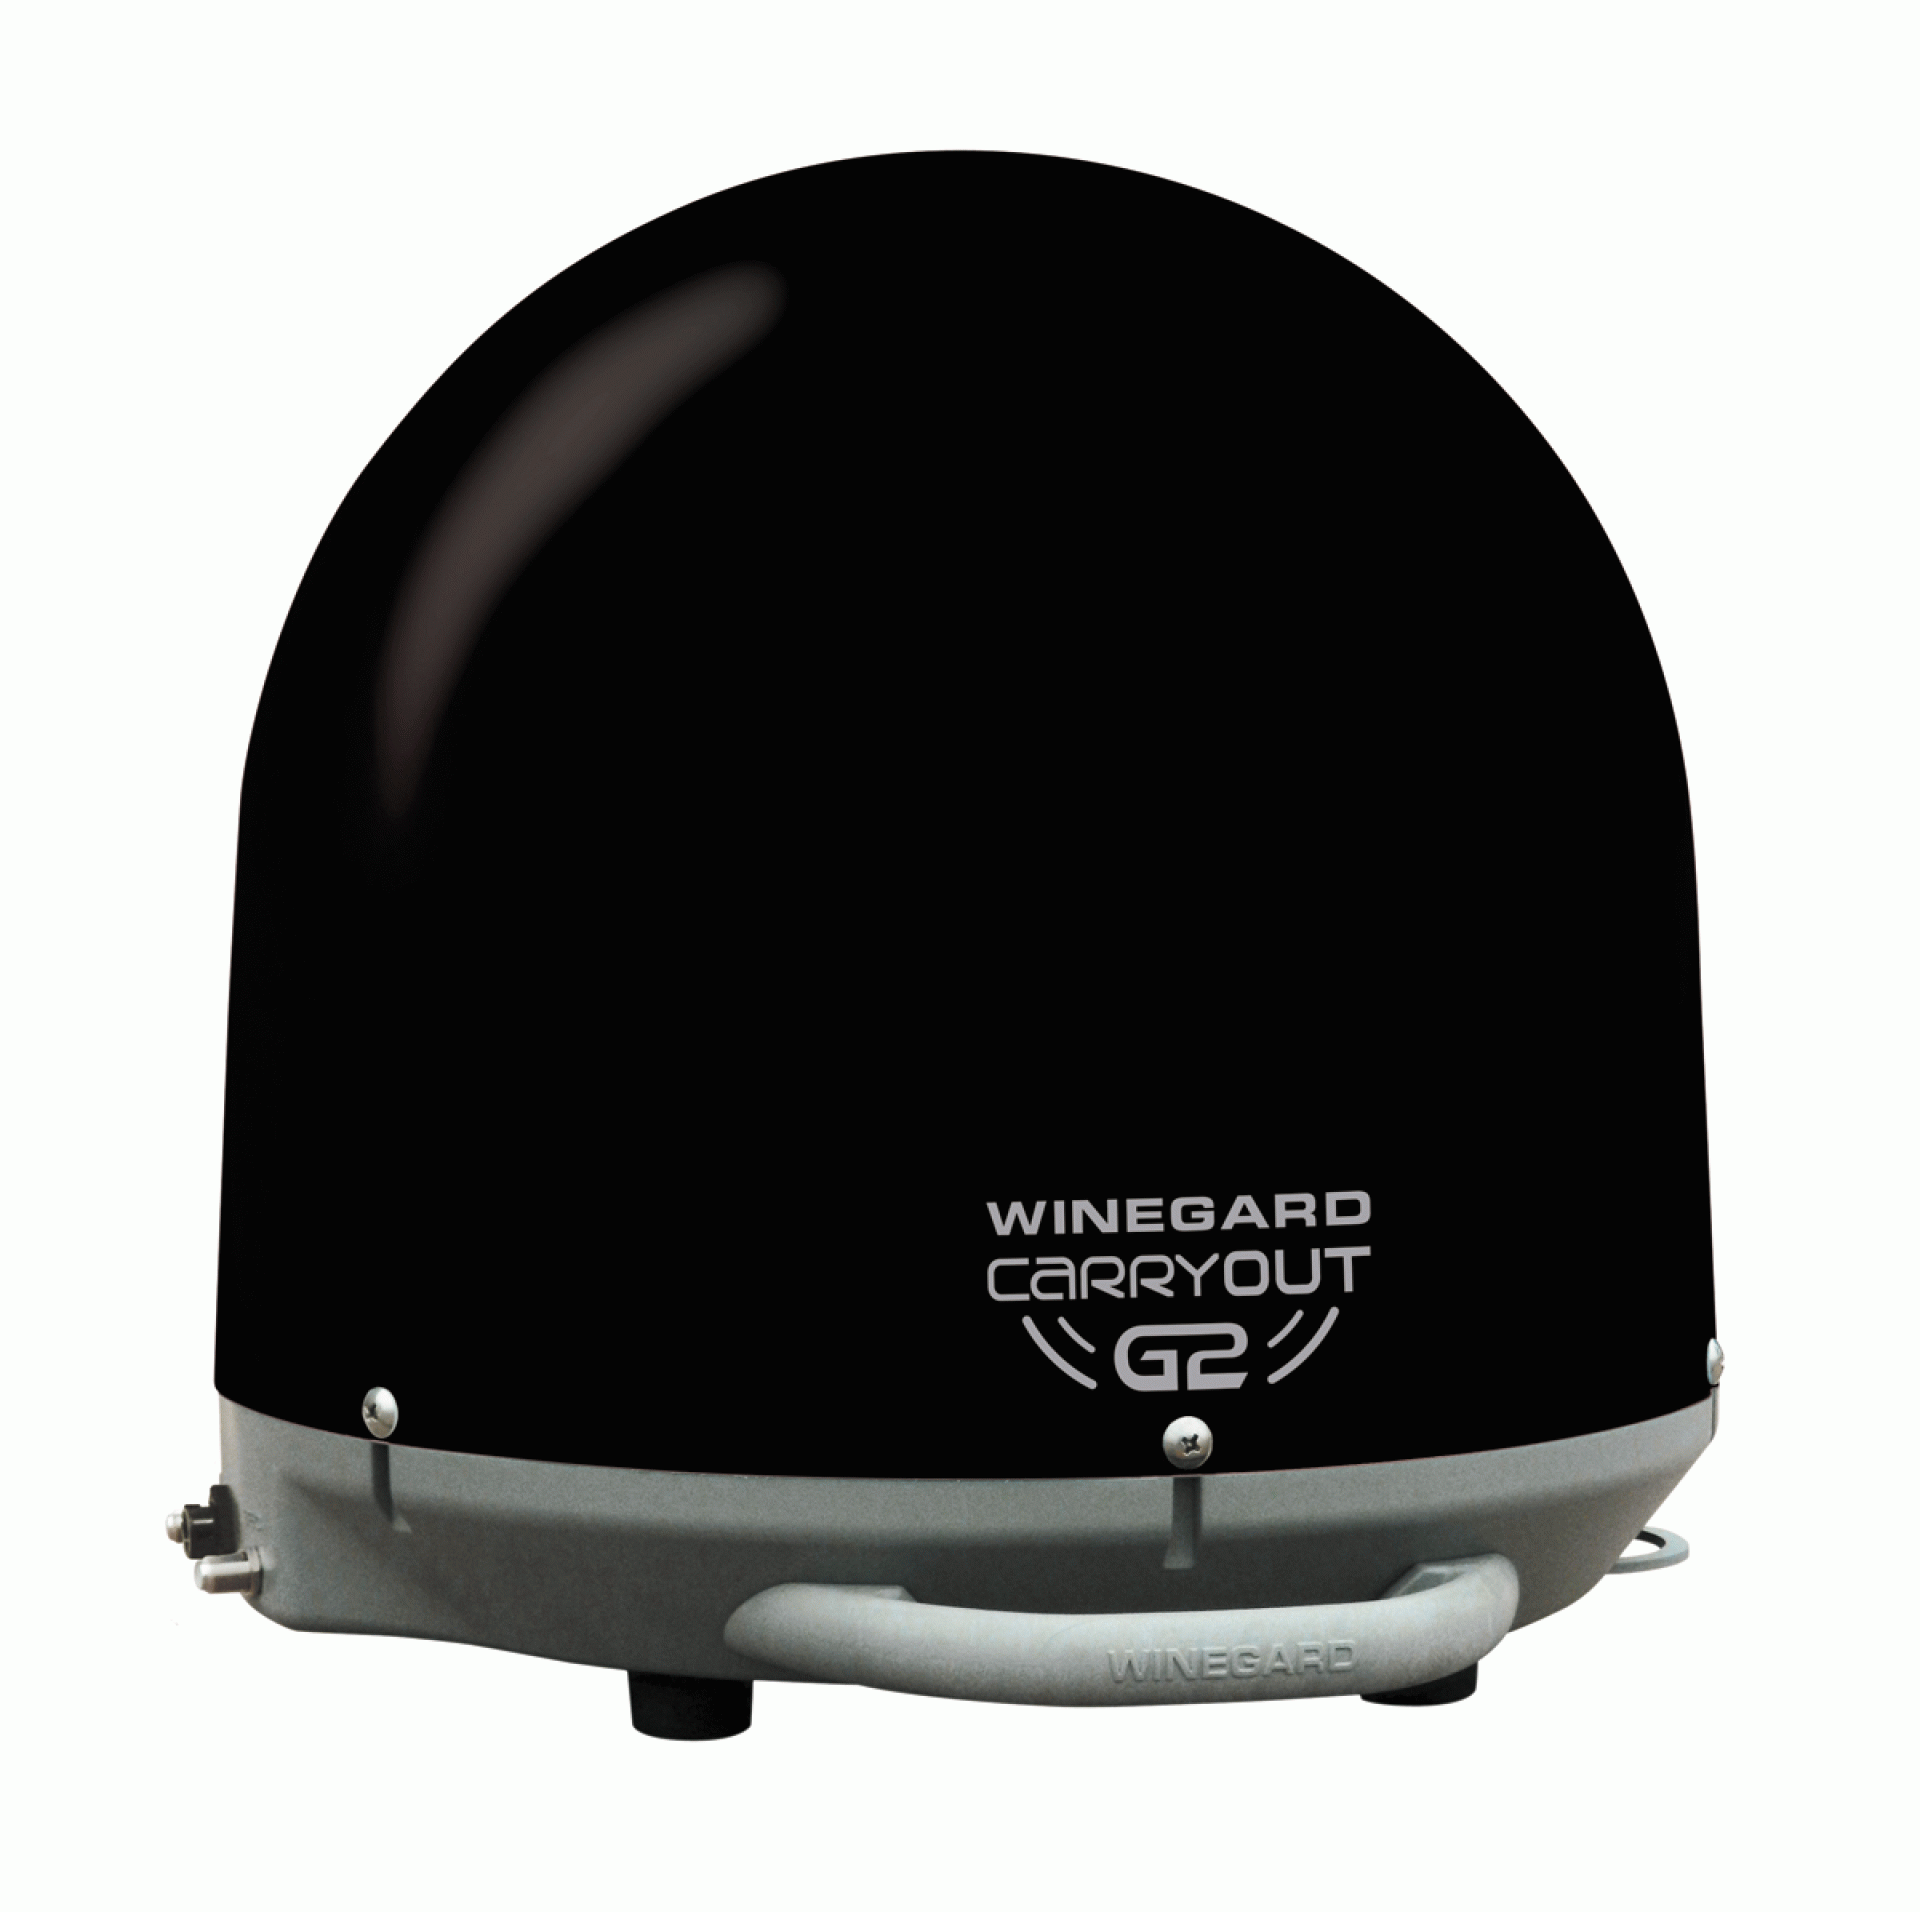 WINEGARD COMPANY | GM-2035 | CARRYOUT G2 AUTOMATIC PORTABLE SATELLITE ANTENNA - BLACK